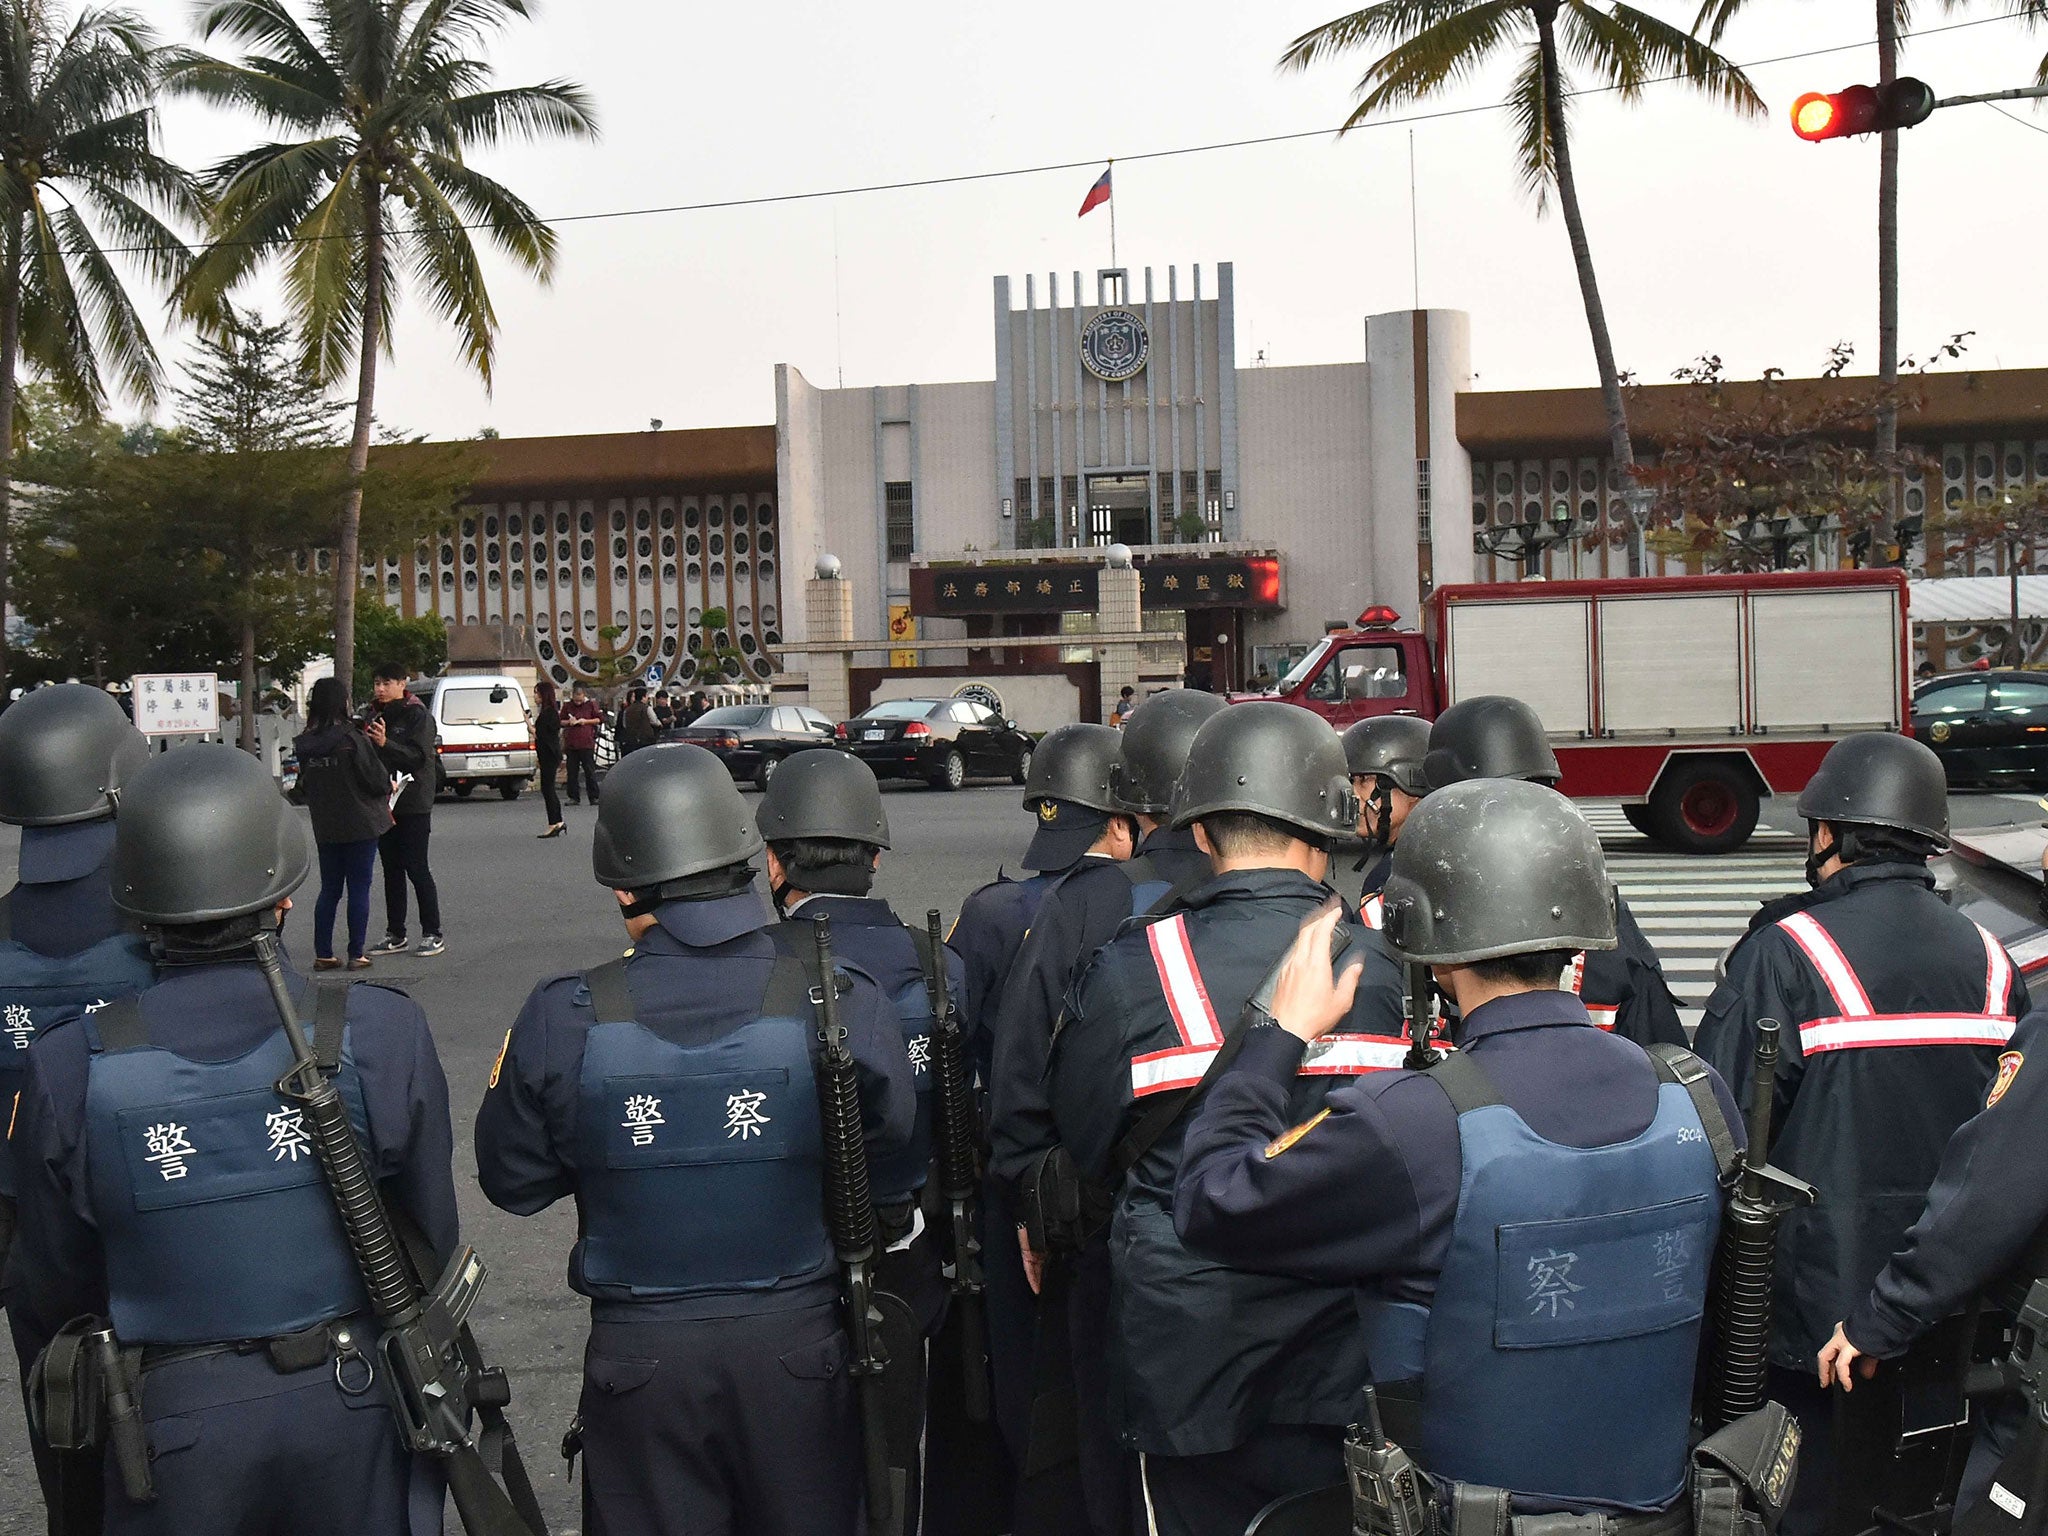 Armed riot police gather outside the Kaohsiung Prison in southern Taiwan on February 11, 2015